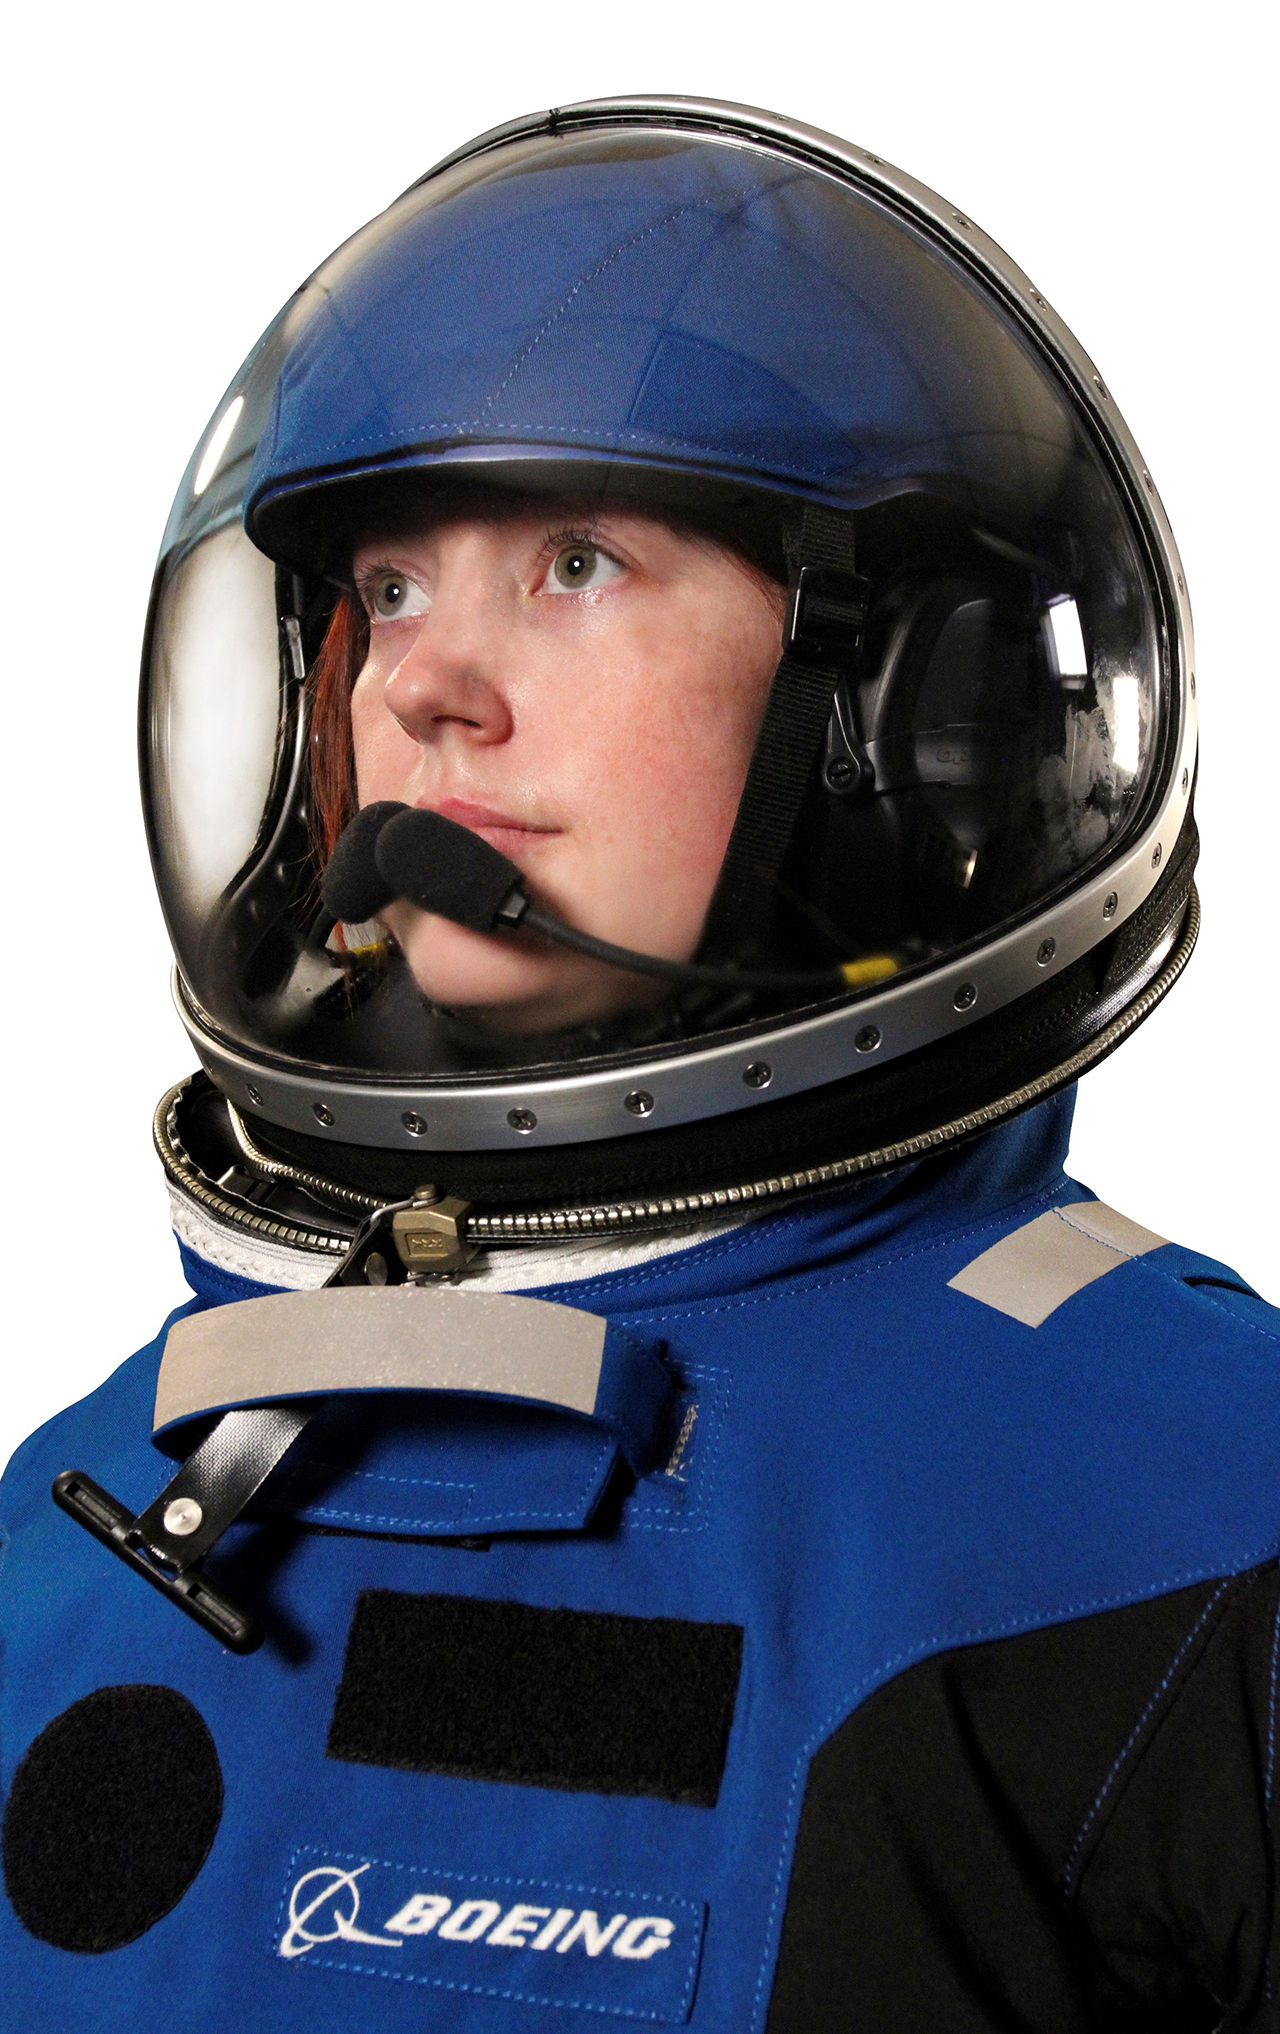 Detail shot of the integrated helmet that is part ILC Dover's Ascent and Entry Suit (AES) for Boeing's CST-100 Starliner spacecraft. The faceplate can be removed and replaced separately.